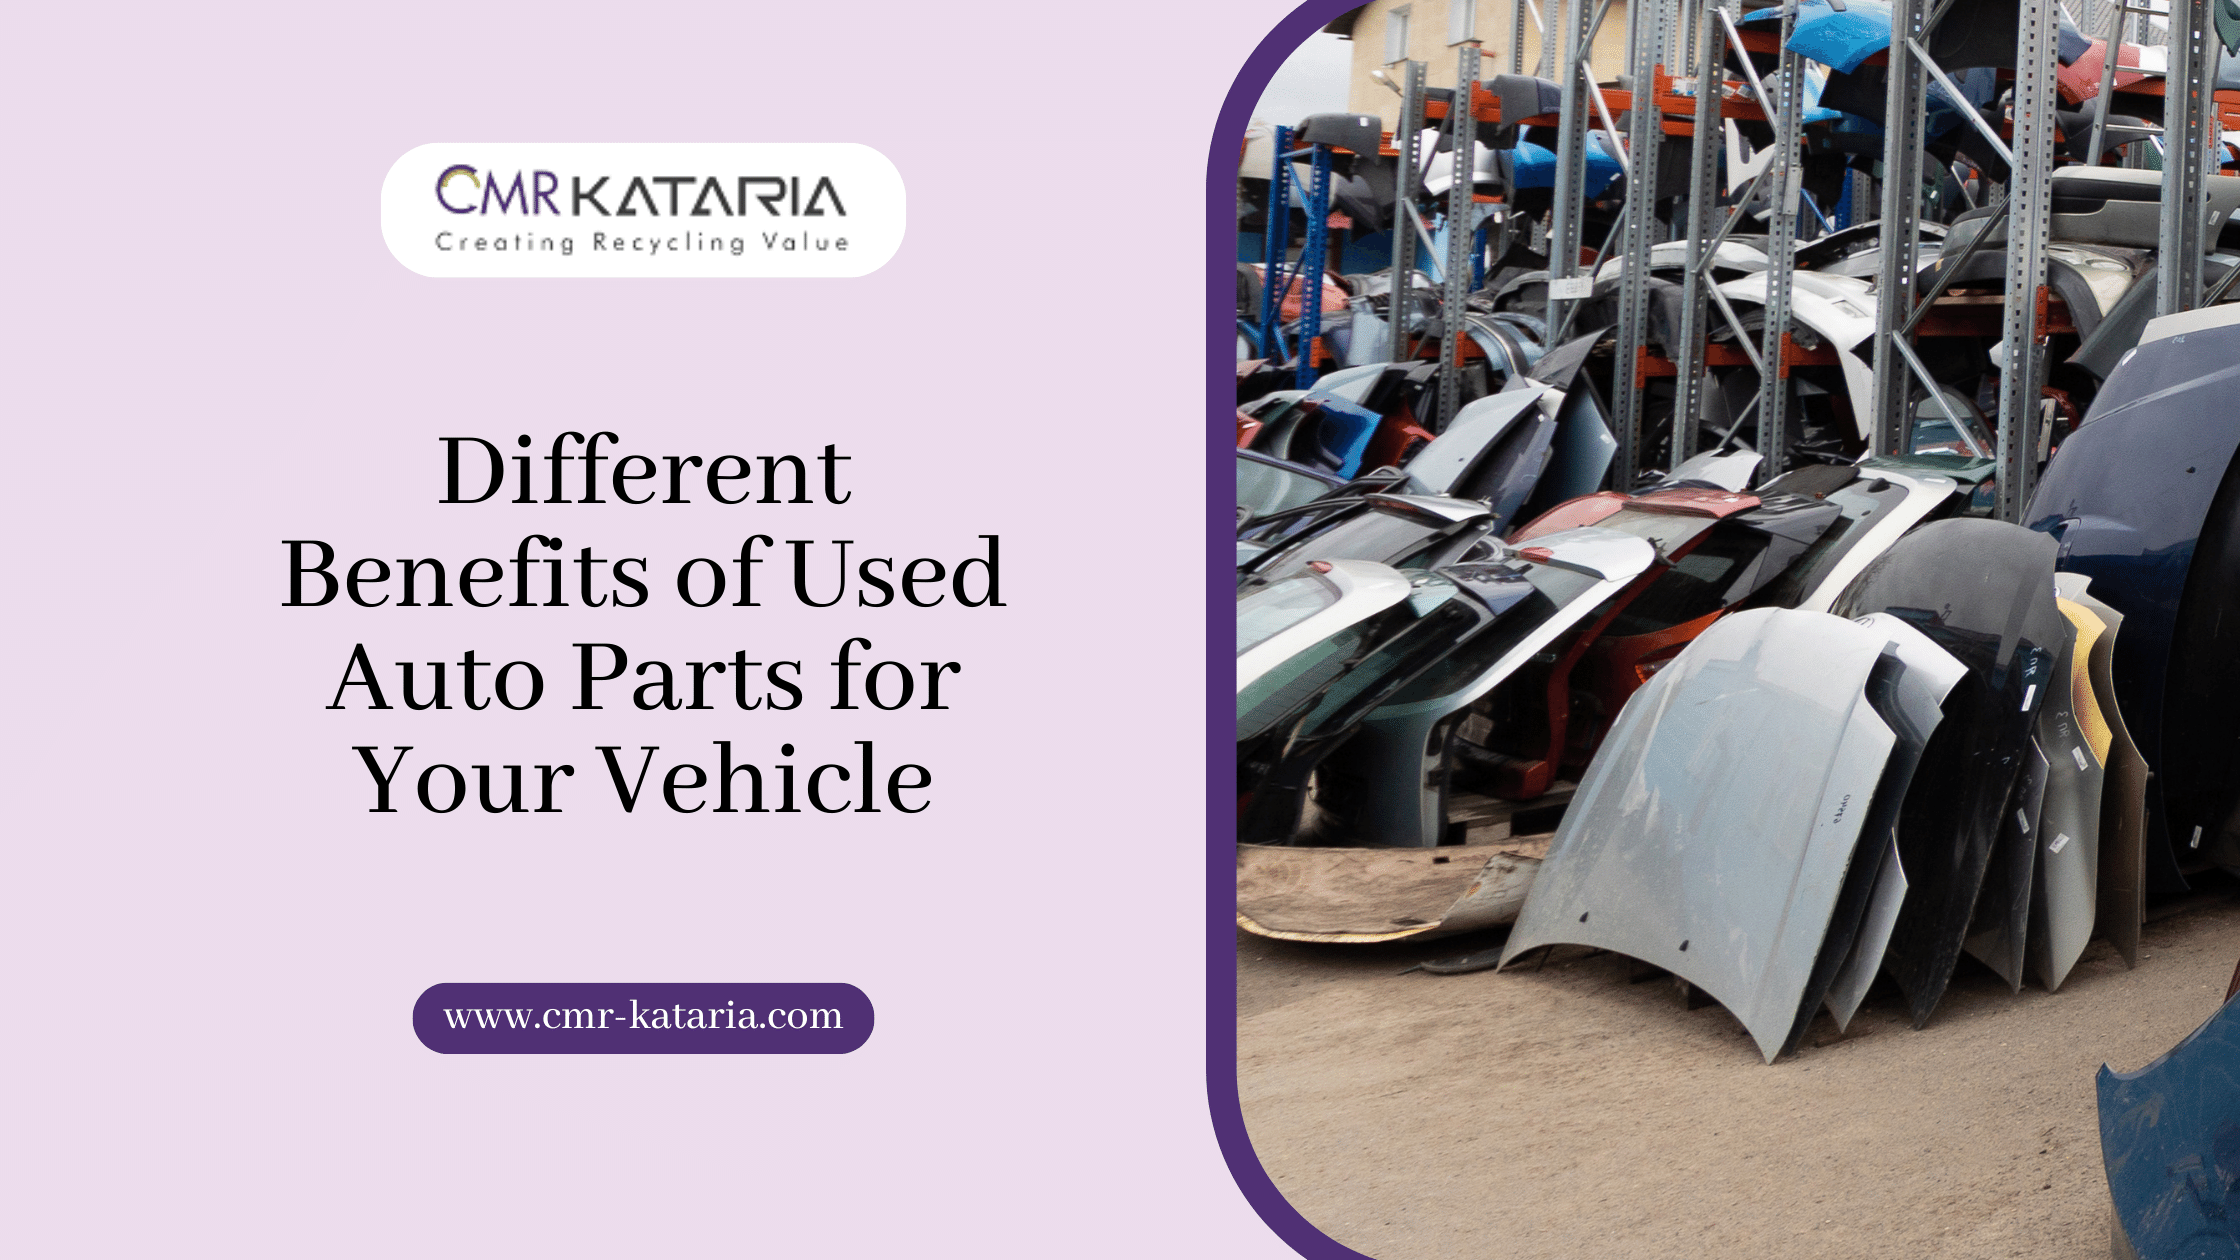 Different Benefits of Used Auto Parts for Your Vehicle